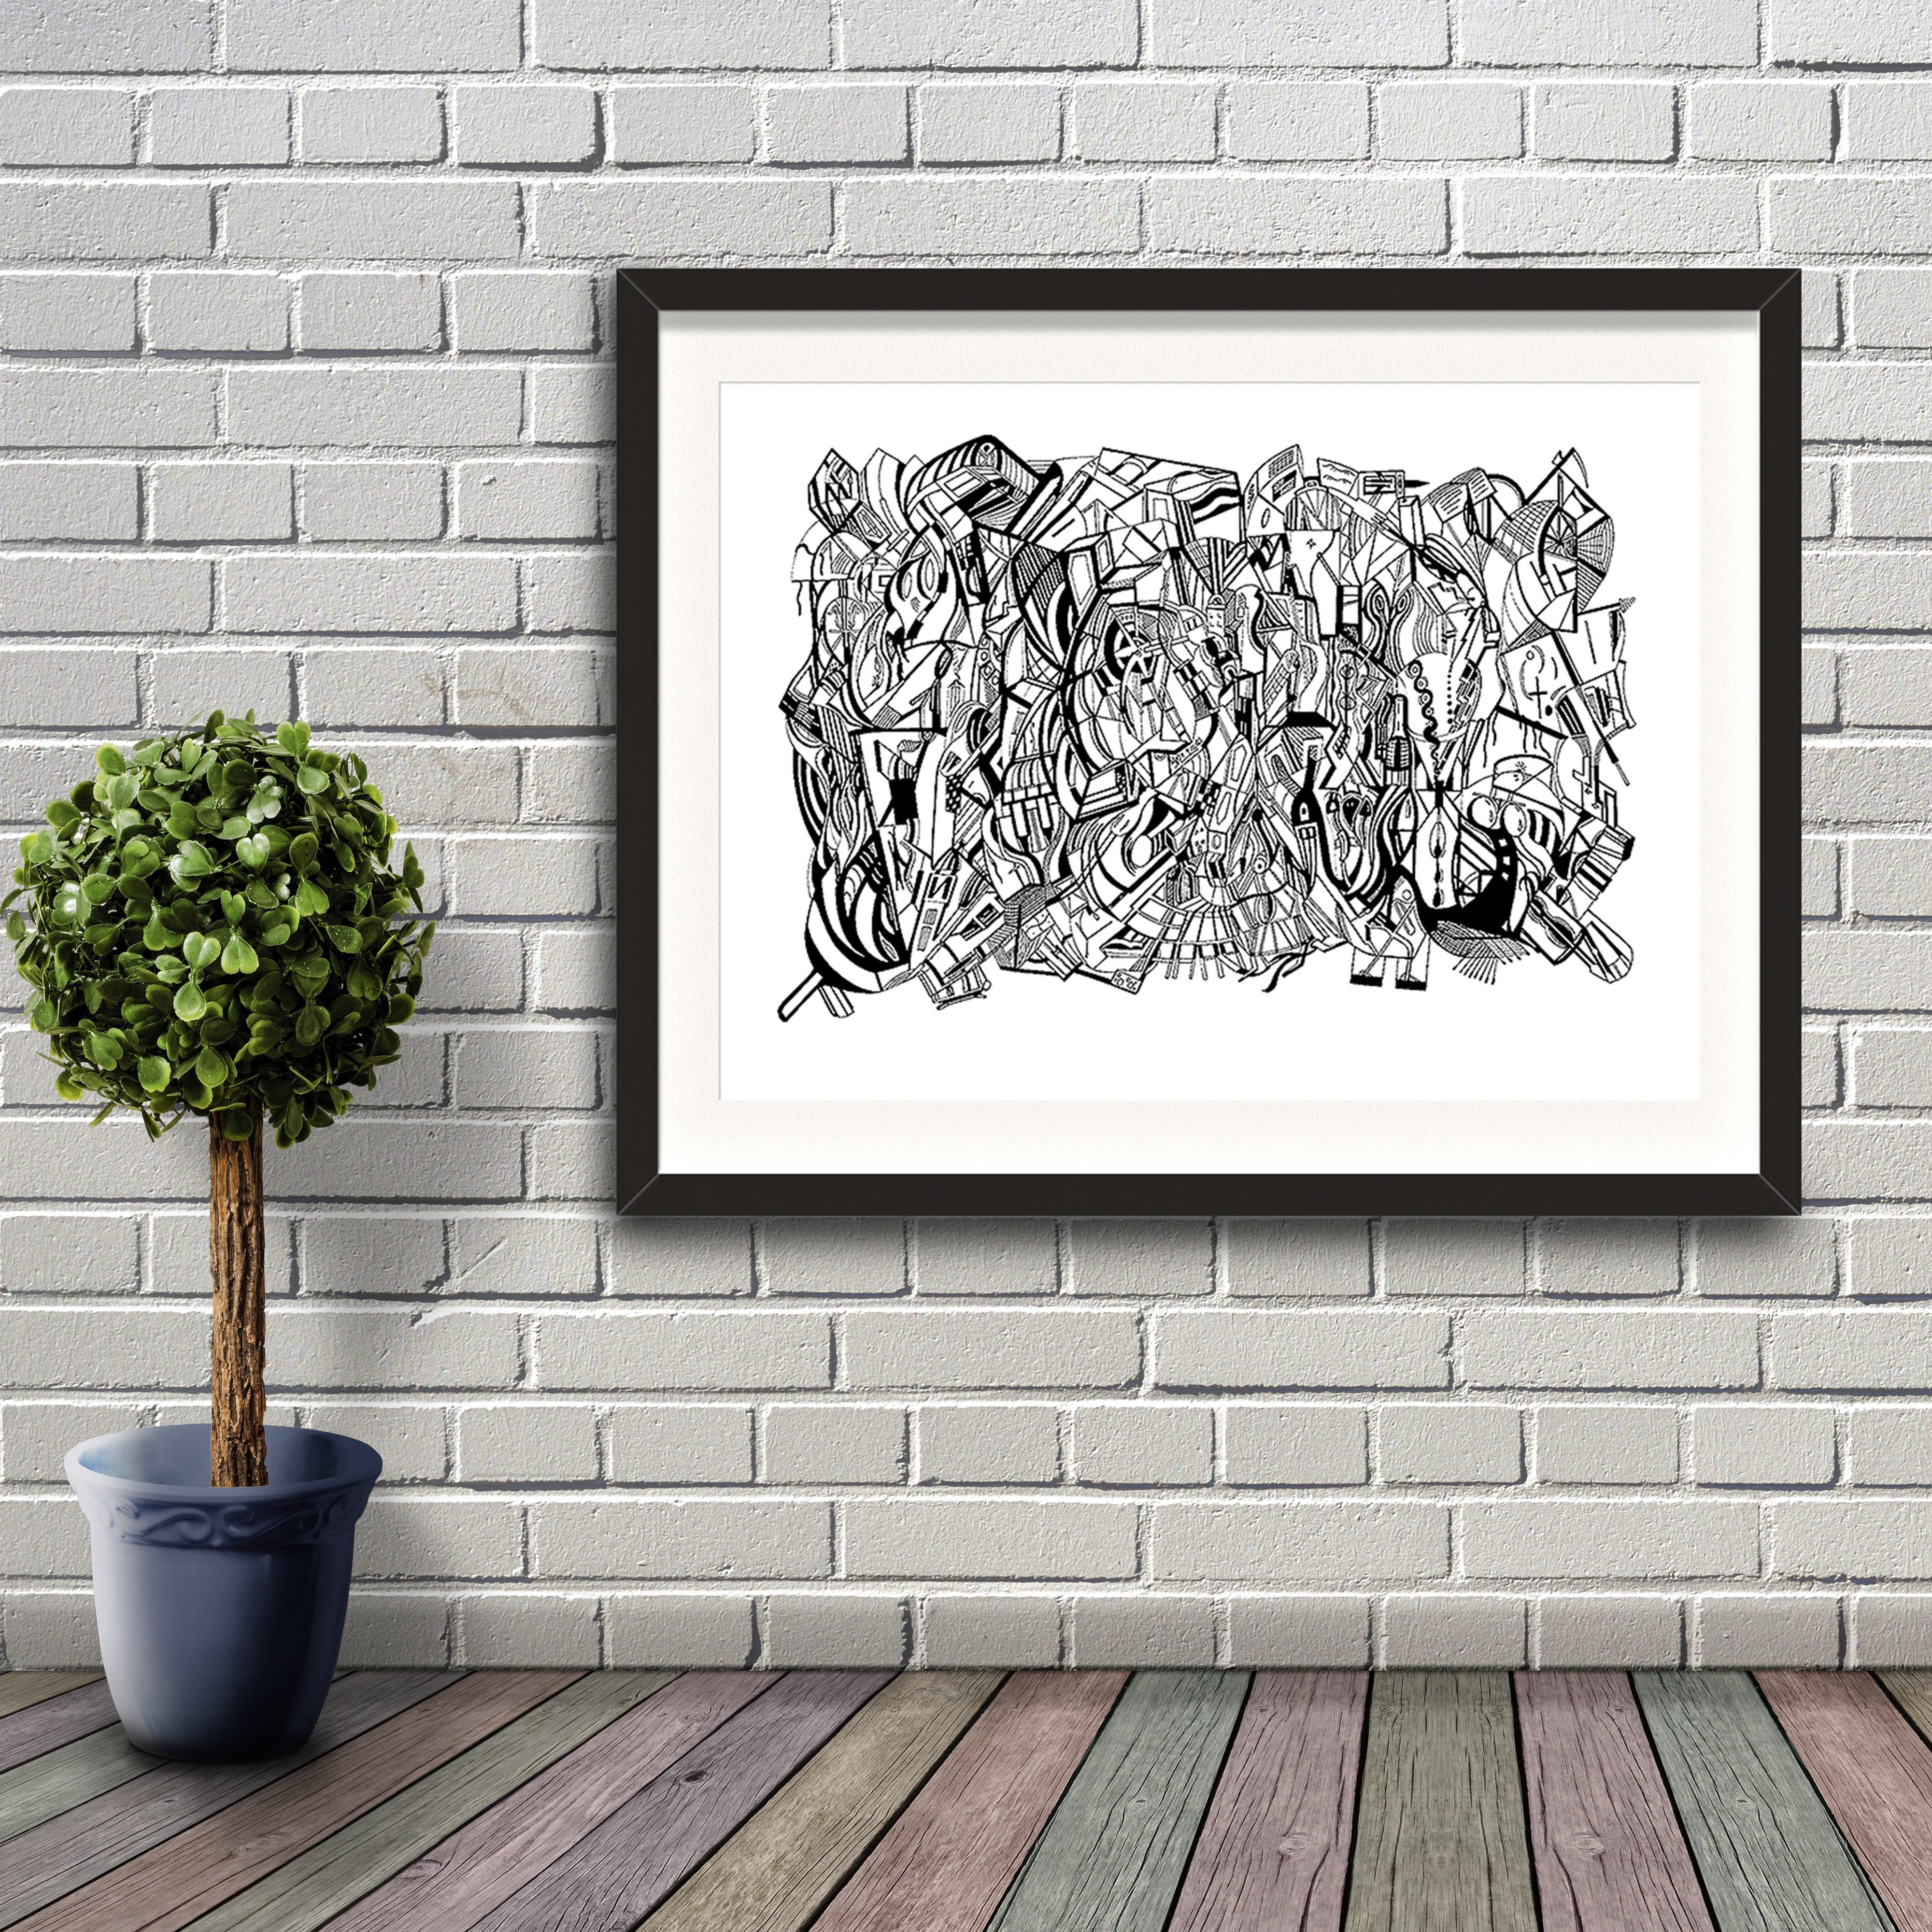 A fine art print from Jason Clarke titled inside The Machine drawn with a black Pentel pen. Artwork shown in a black frame hanging on a brick wall.